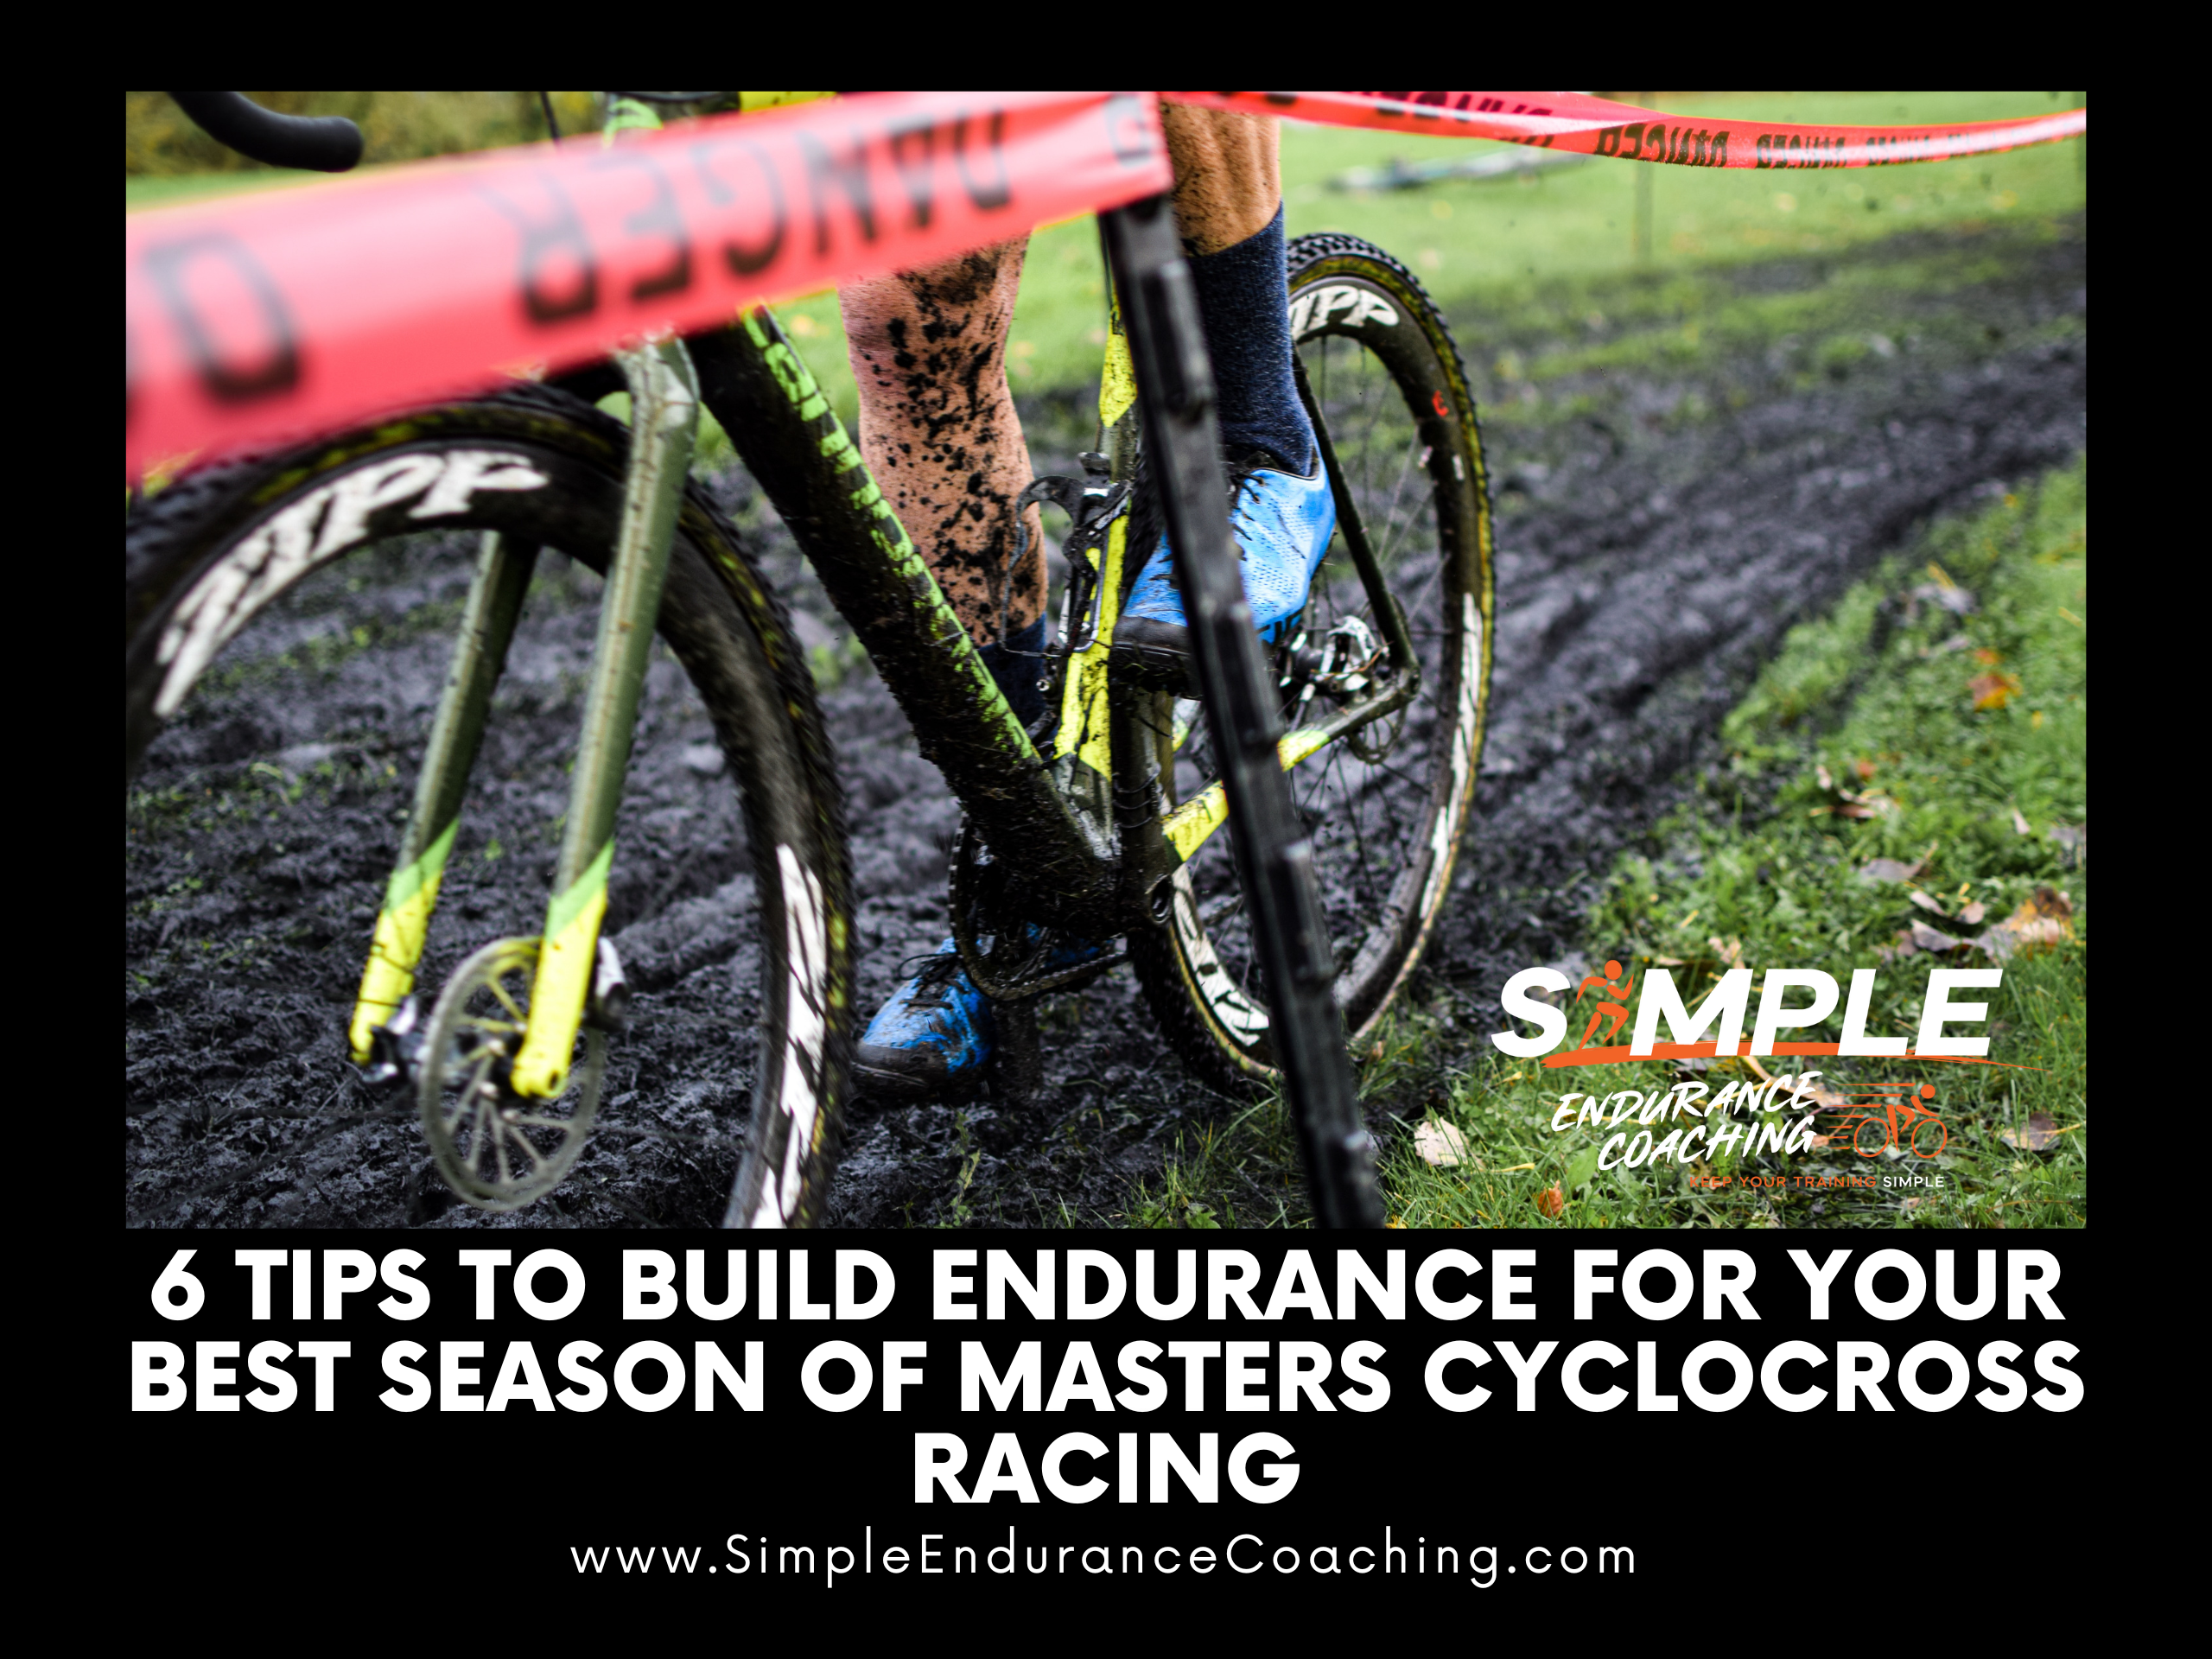 If you're a masters cyclist, you know that racing is tough. These 6 tips will help you build endurance for your best season yet.